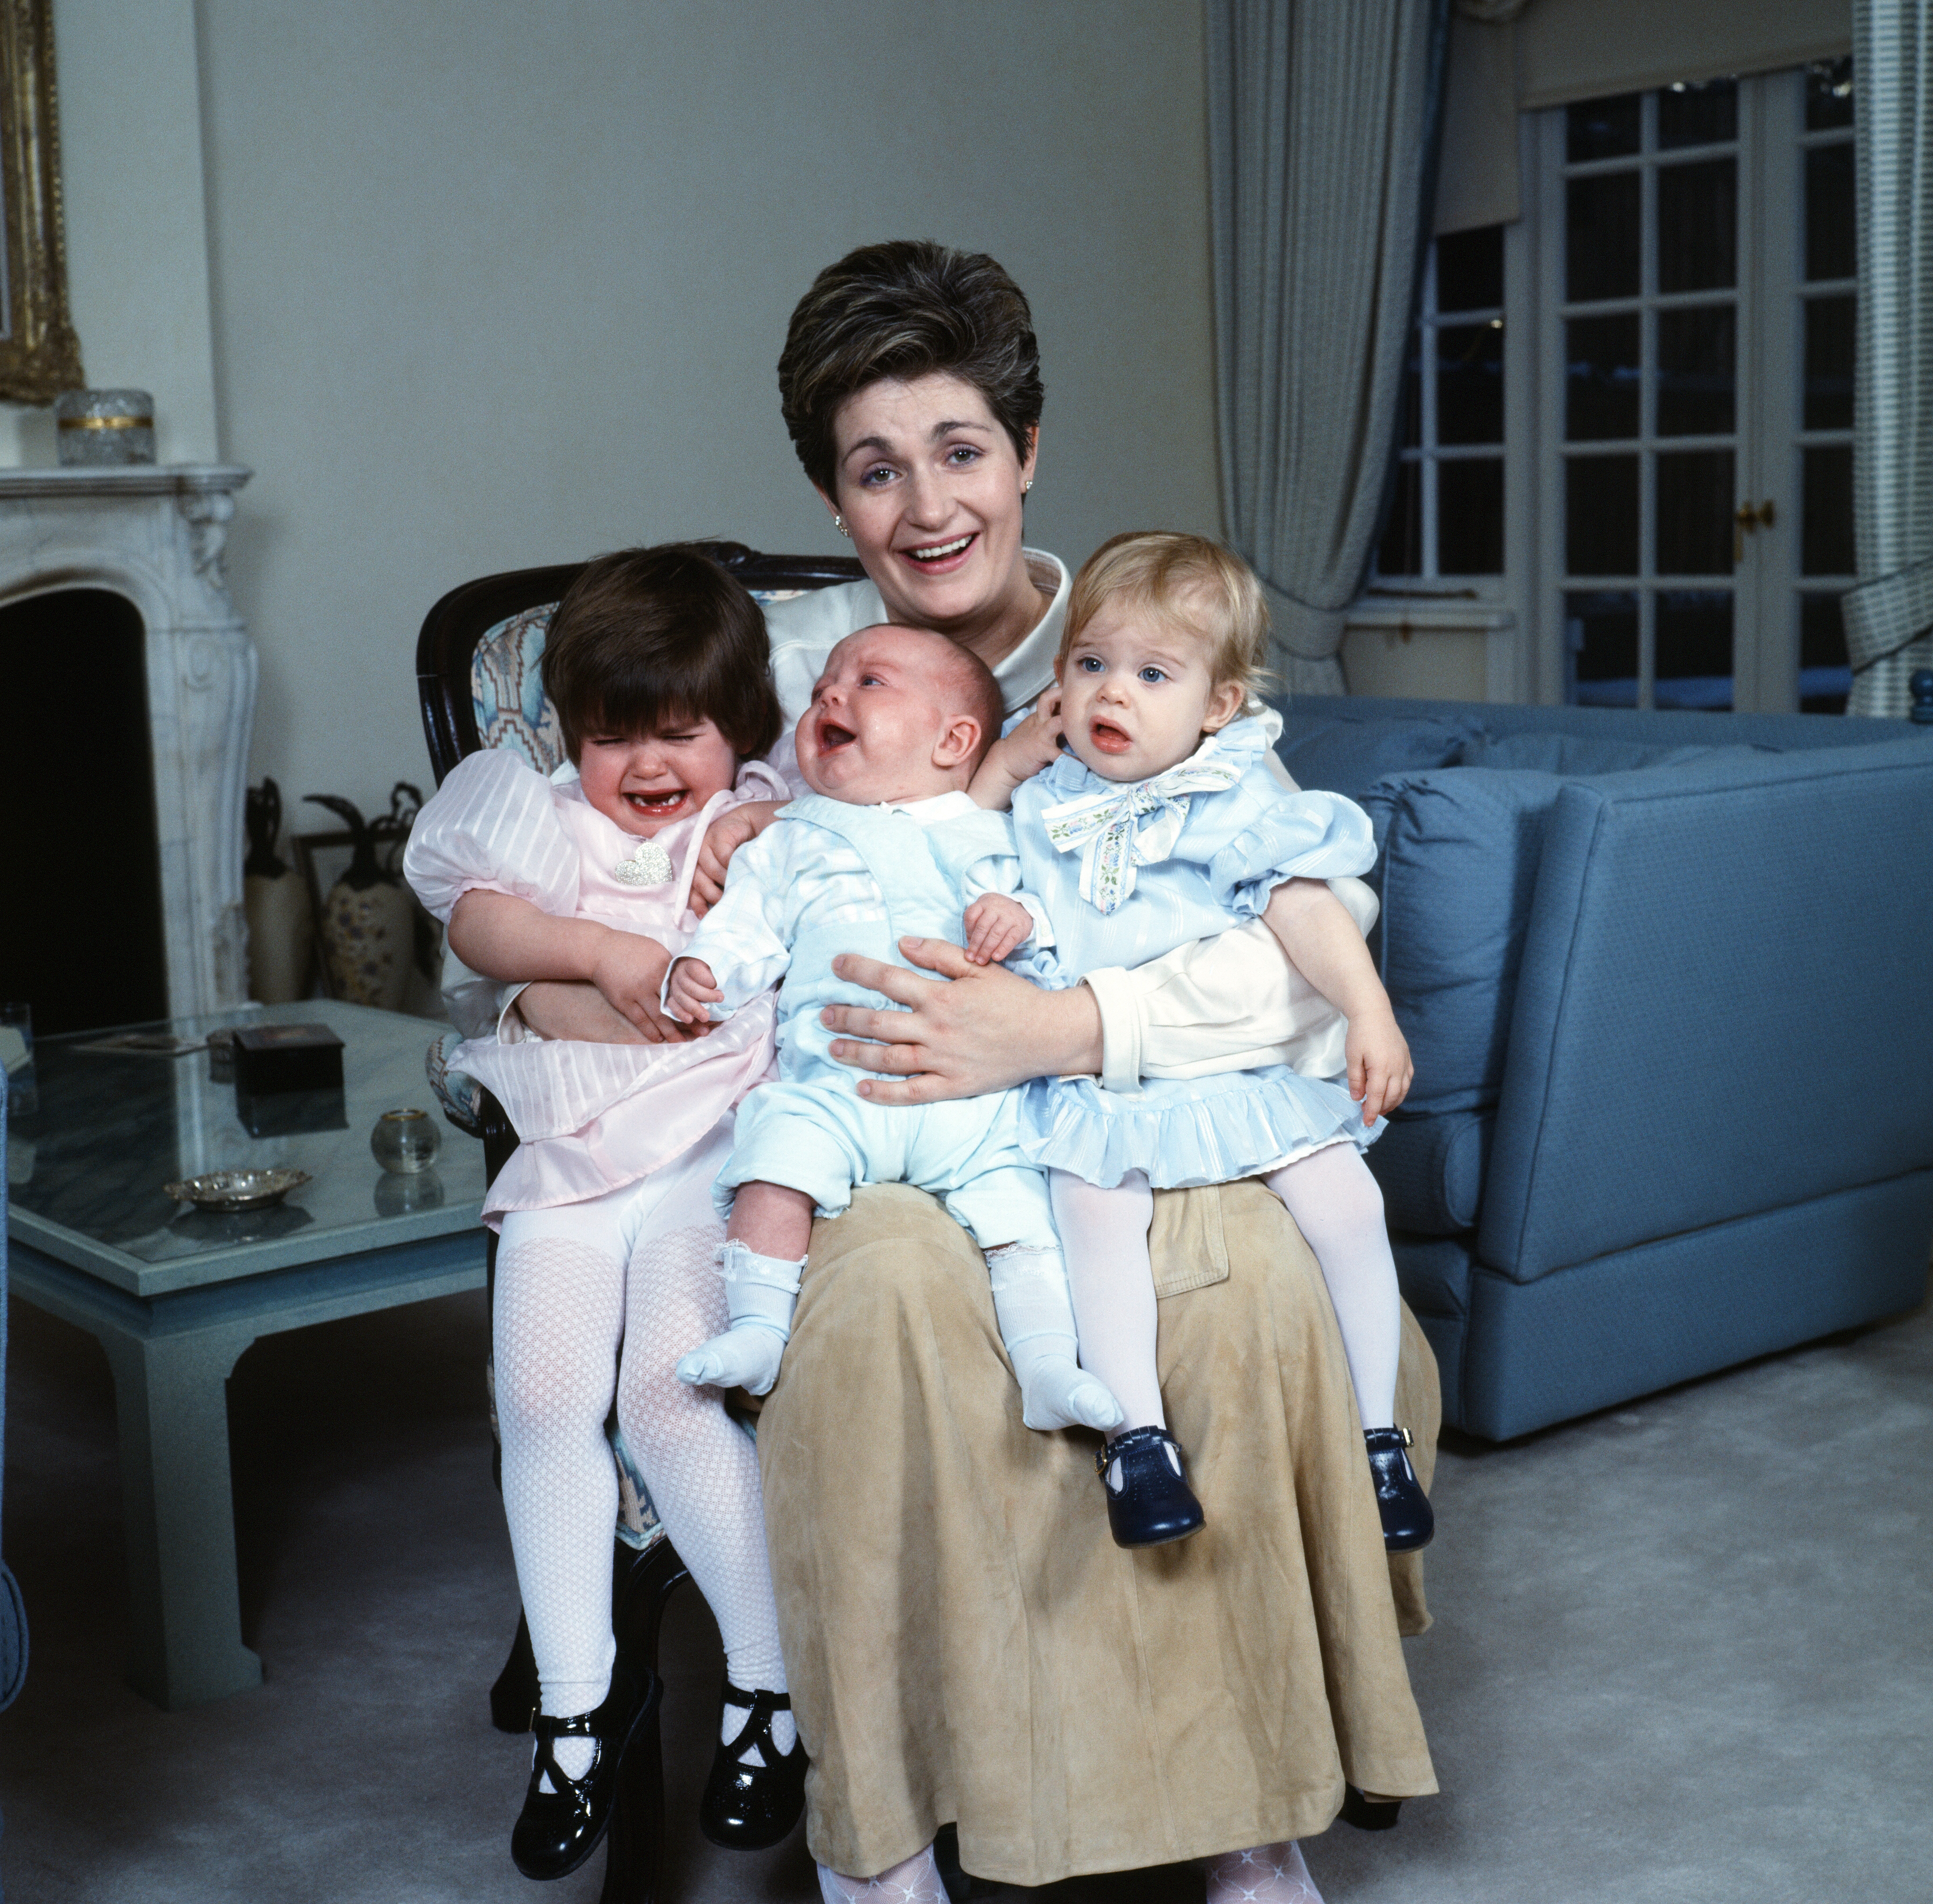 Sharon Osbourne with her three kids, Aimee, Kelly, and Jack, in 1986 | Source: Getty Images